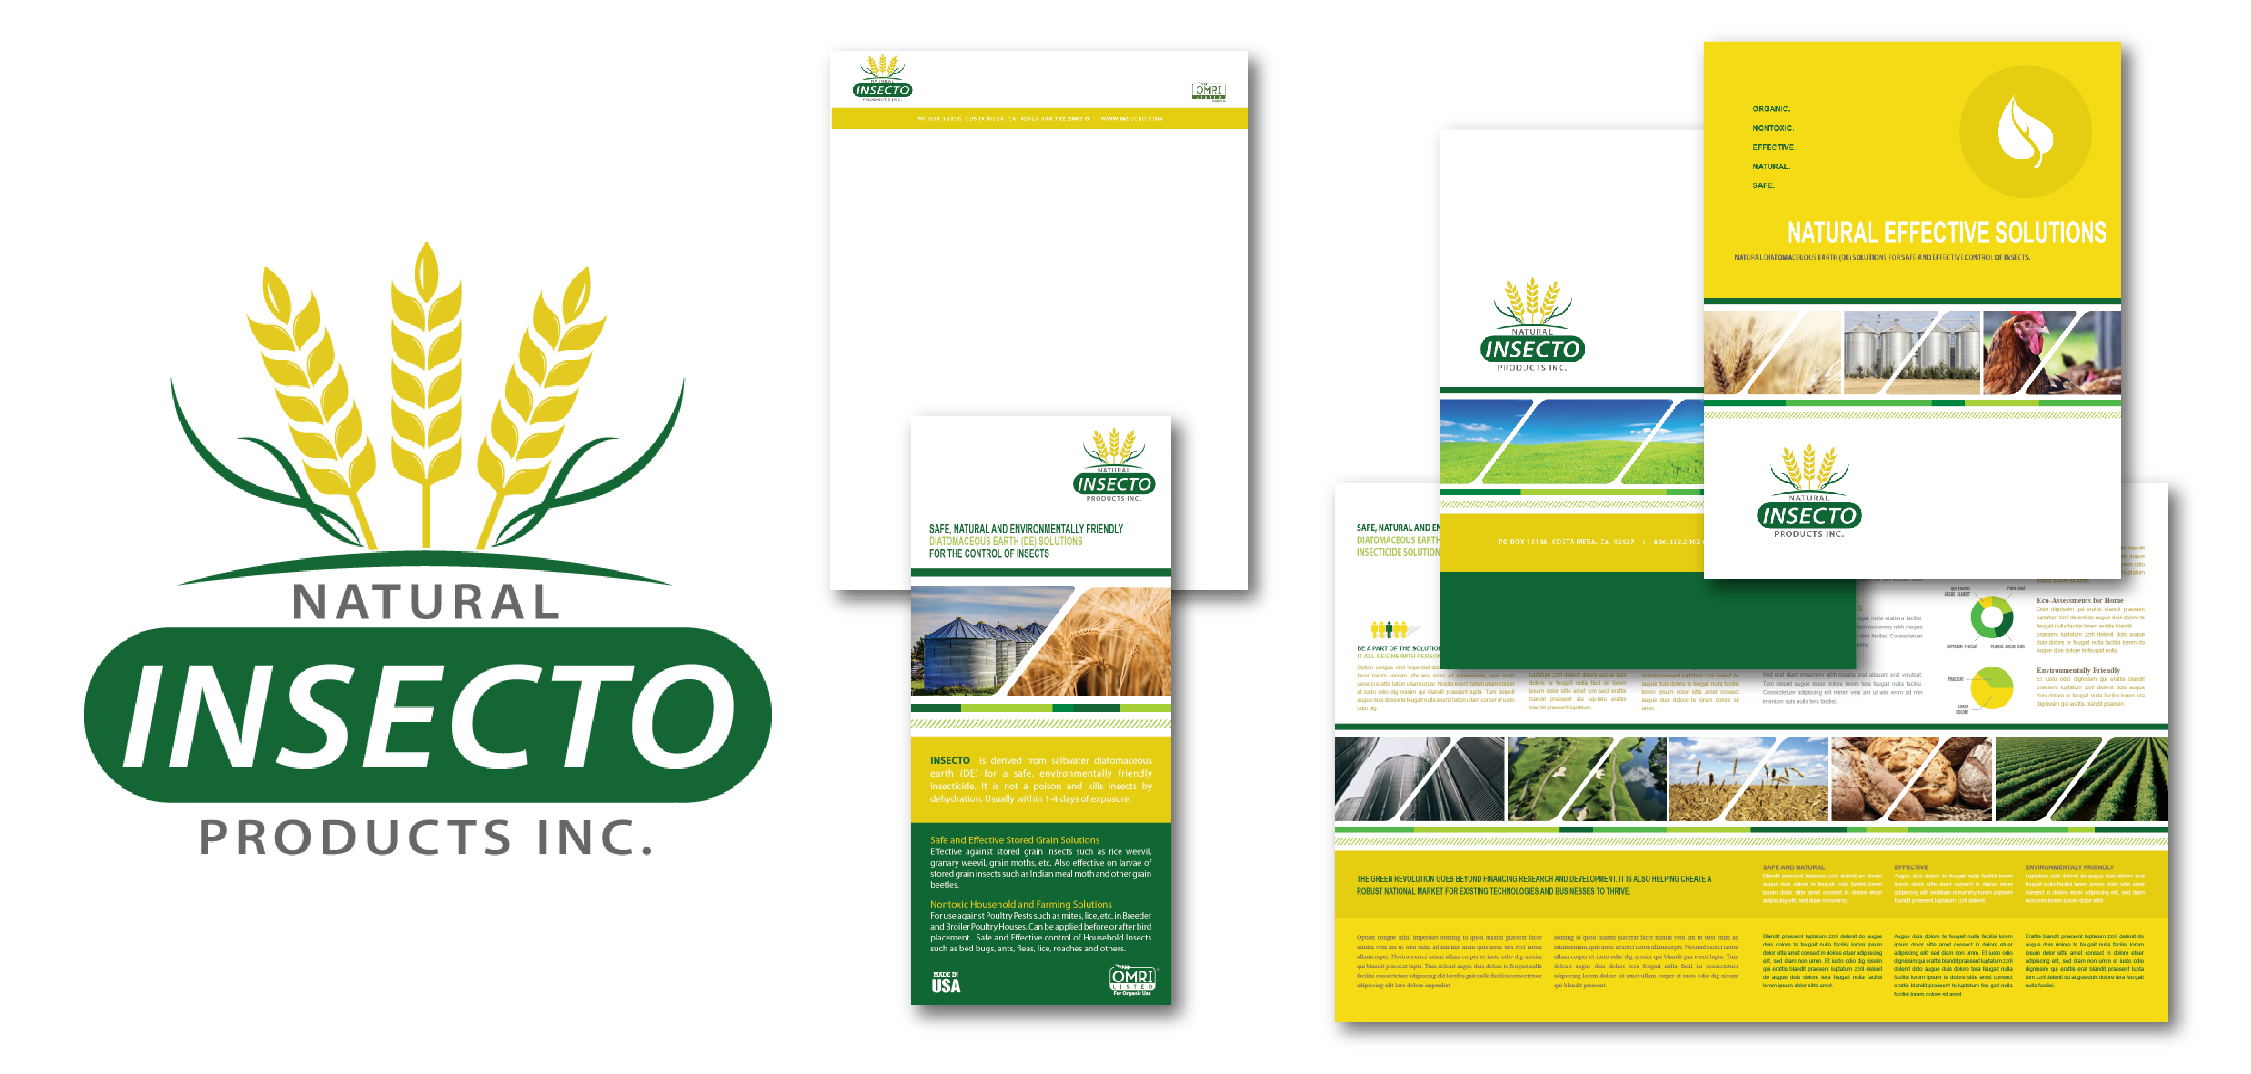 Natural Insecto Products, Inc.